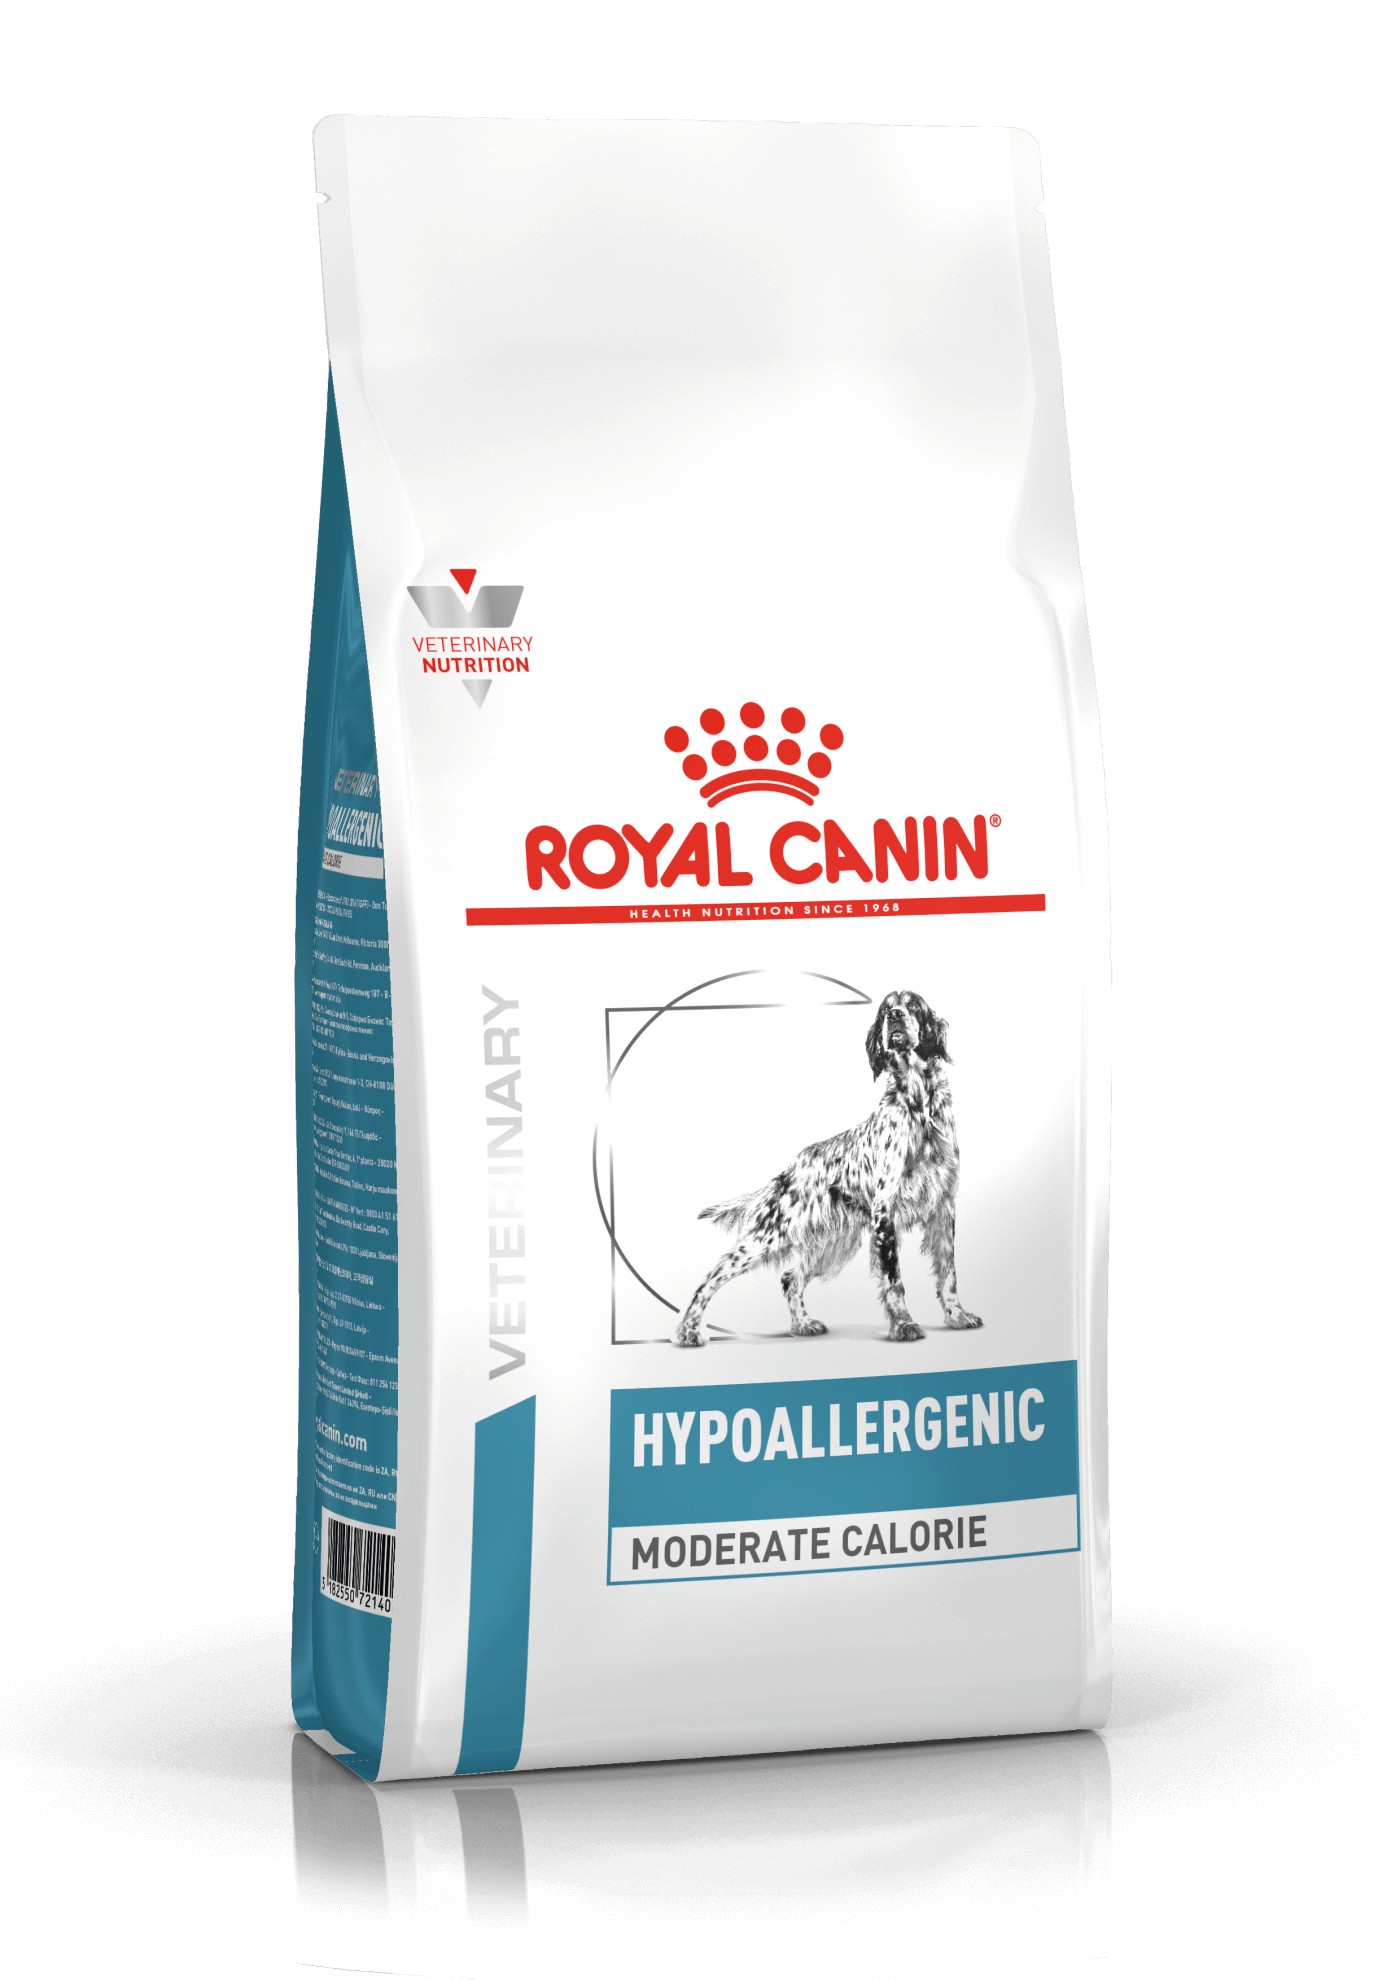 Royal Canin Veterinary Hypoallergenic Moderate Calorie hondenvoer